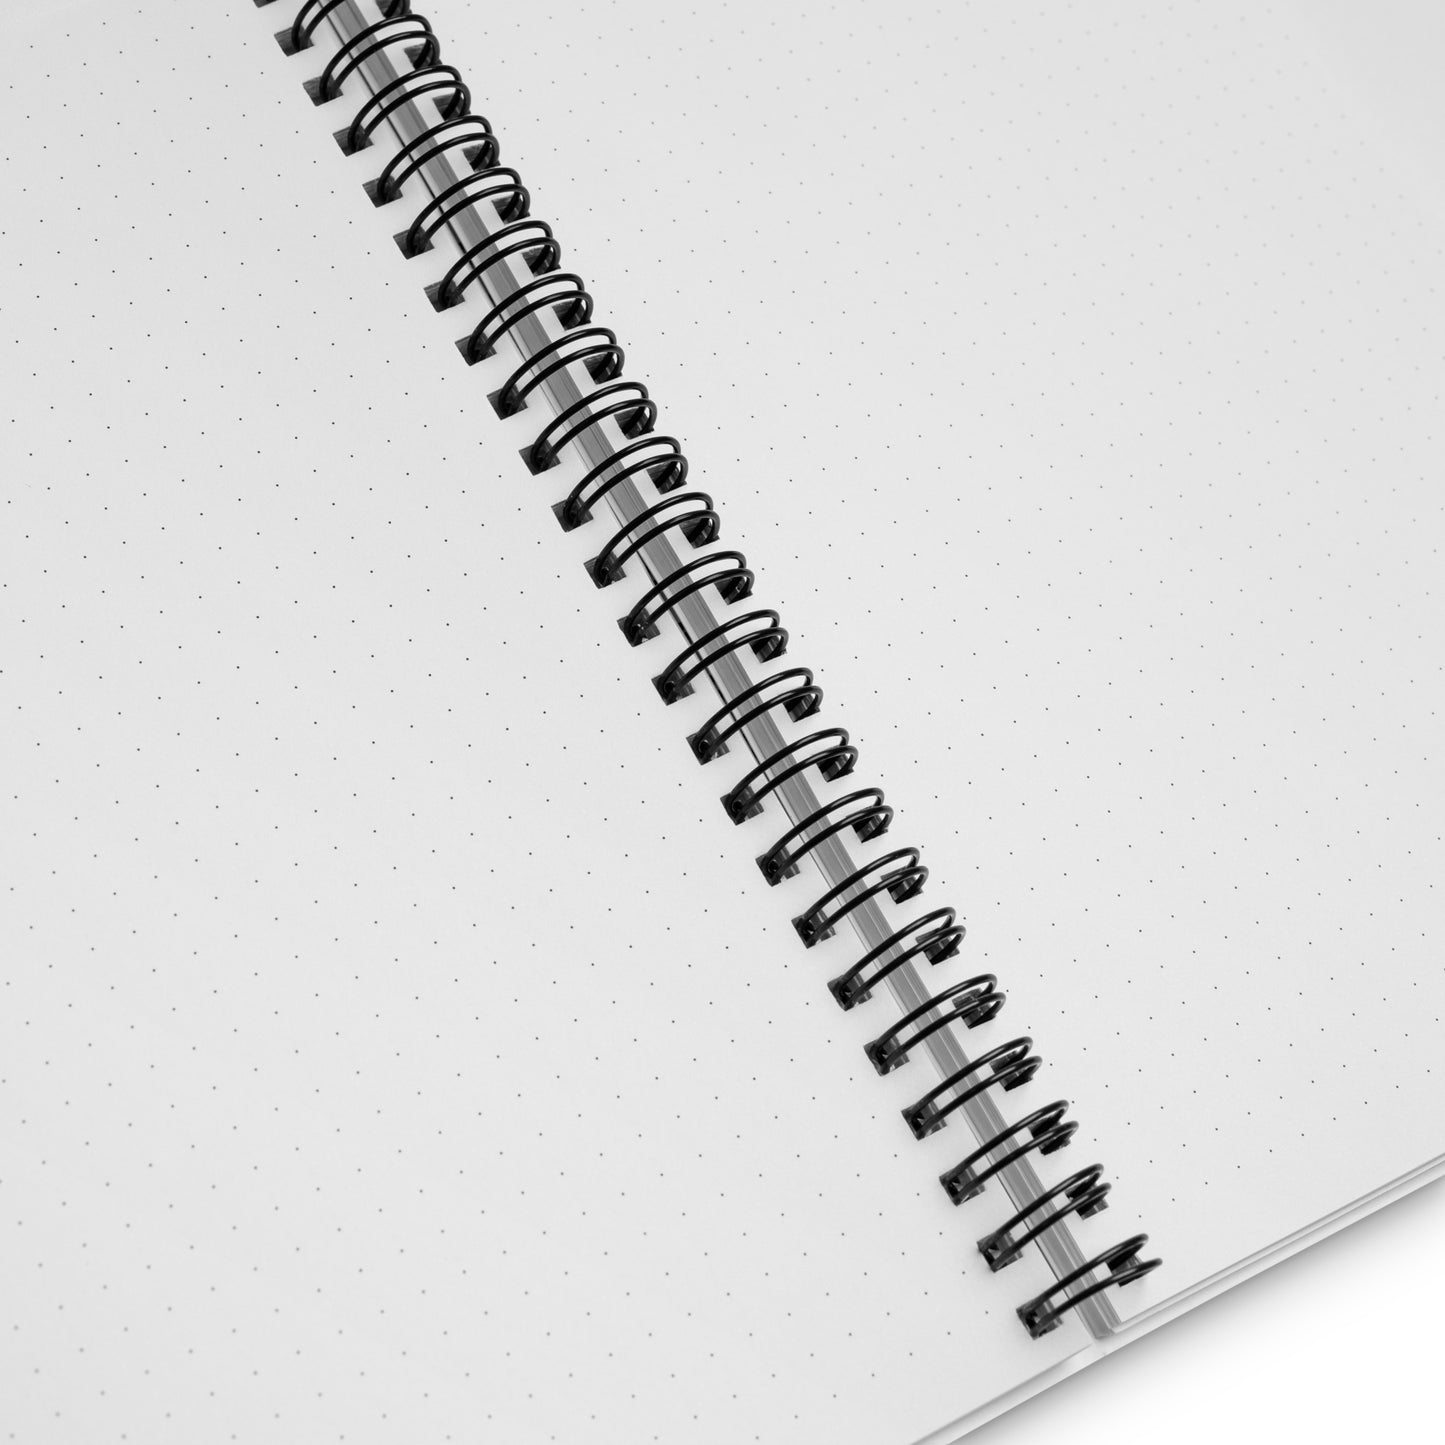 Manifesting journal spiral notebook. Product details of white pages, black dots, and metal wire binding. 140 dotted pages. 5.5 inches x 8.5 inches. Jamilliah's Wisdom Is Timeless Shop - wisdomistimeless.com.